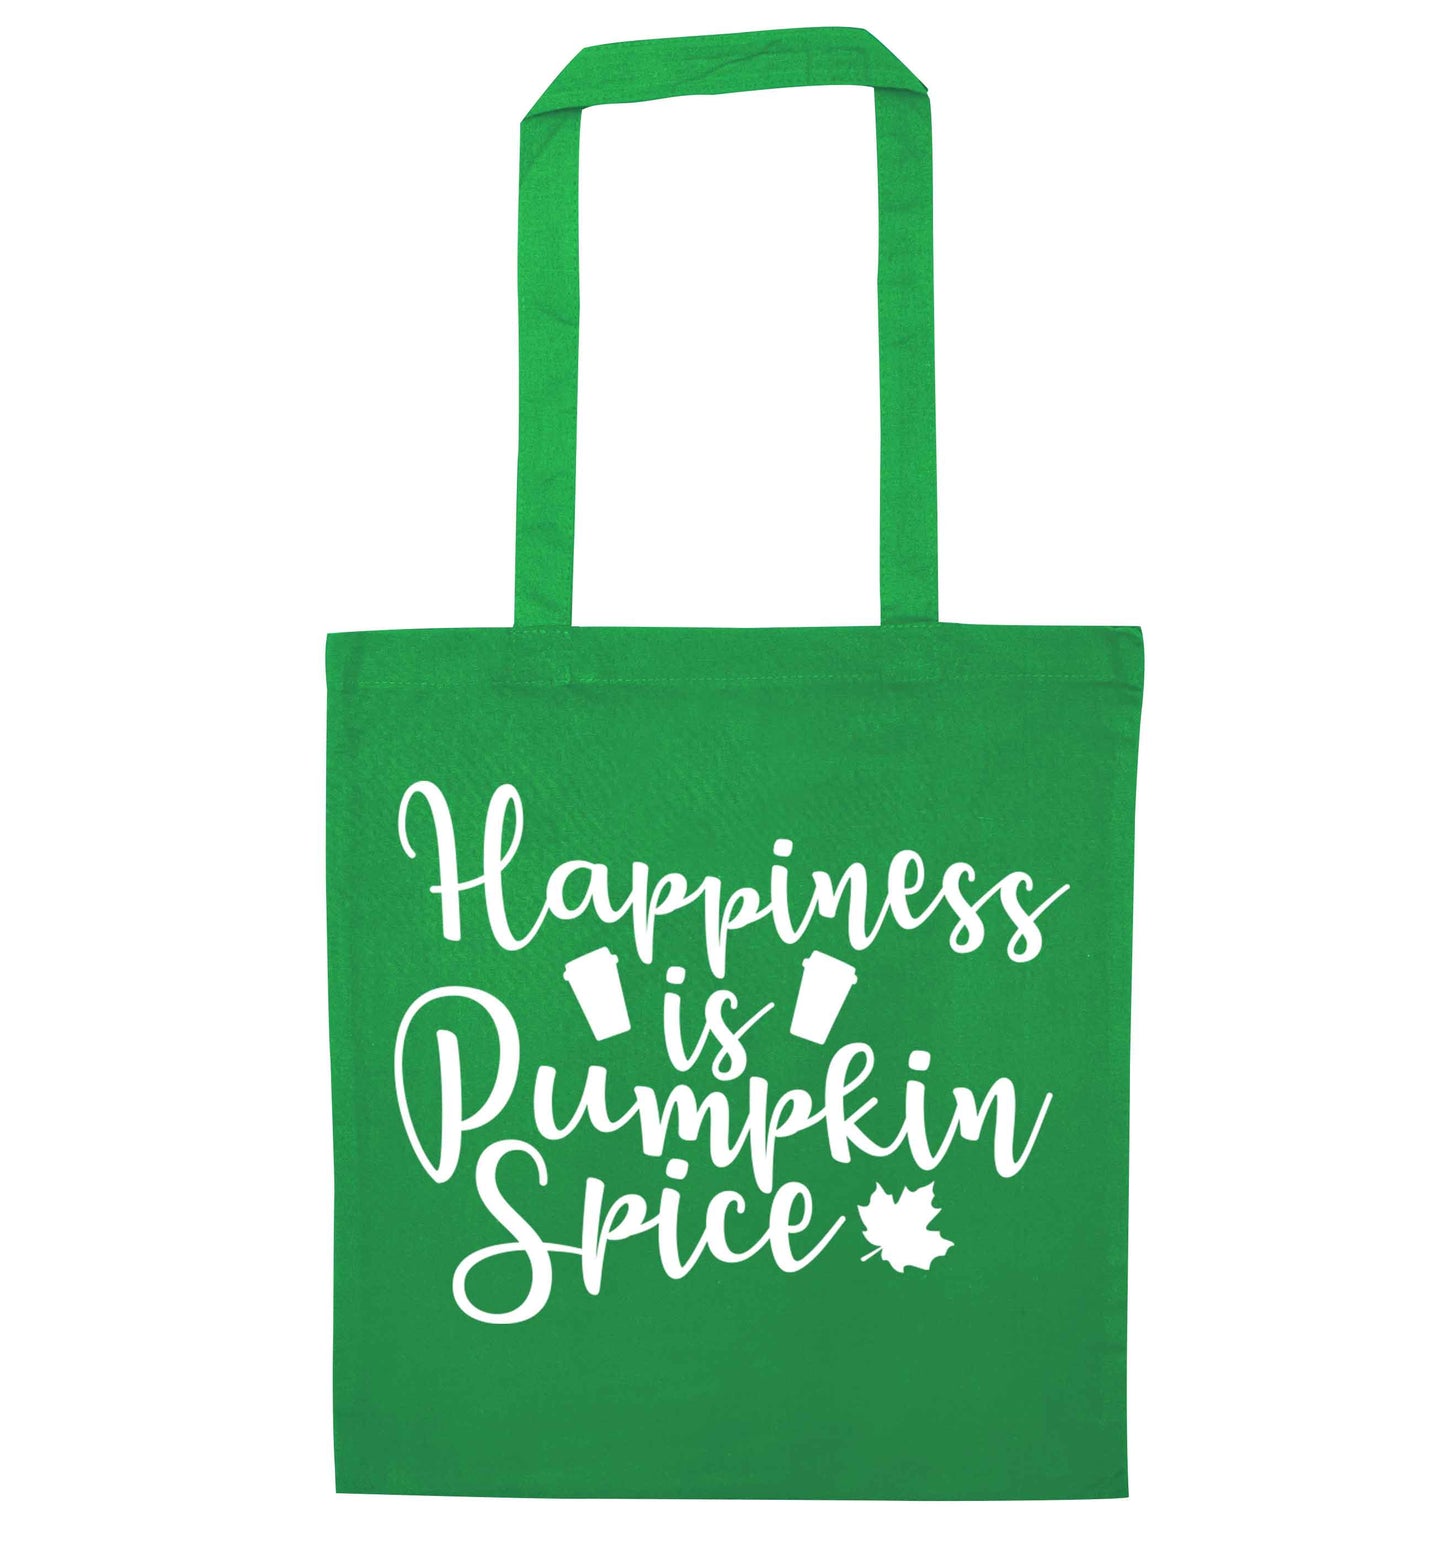 Happiness Pumpkin Spice green tote bag